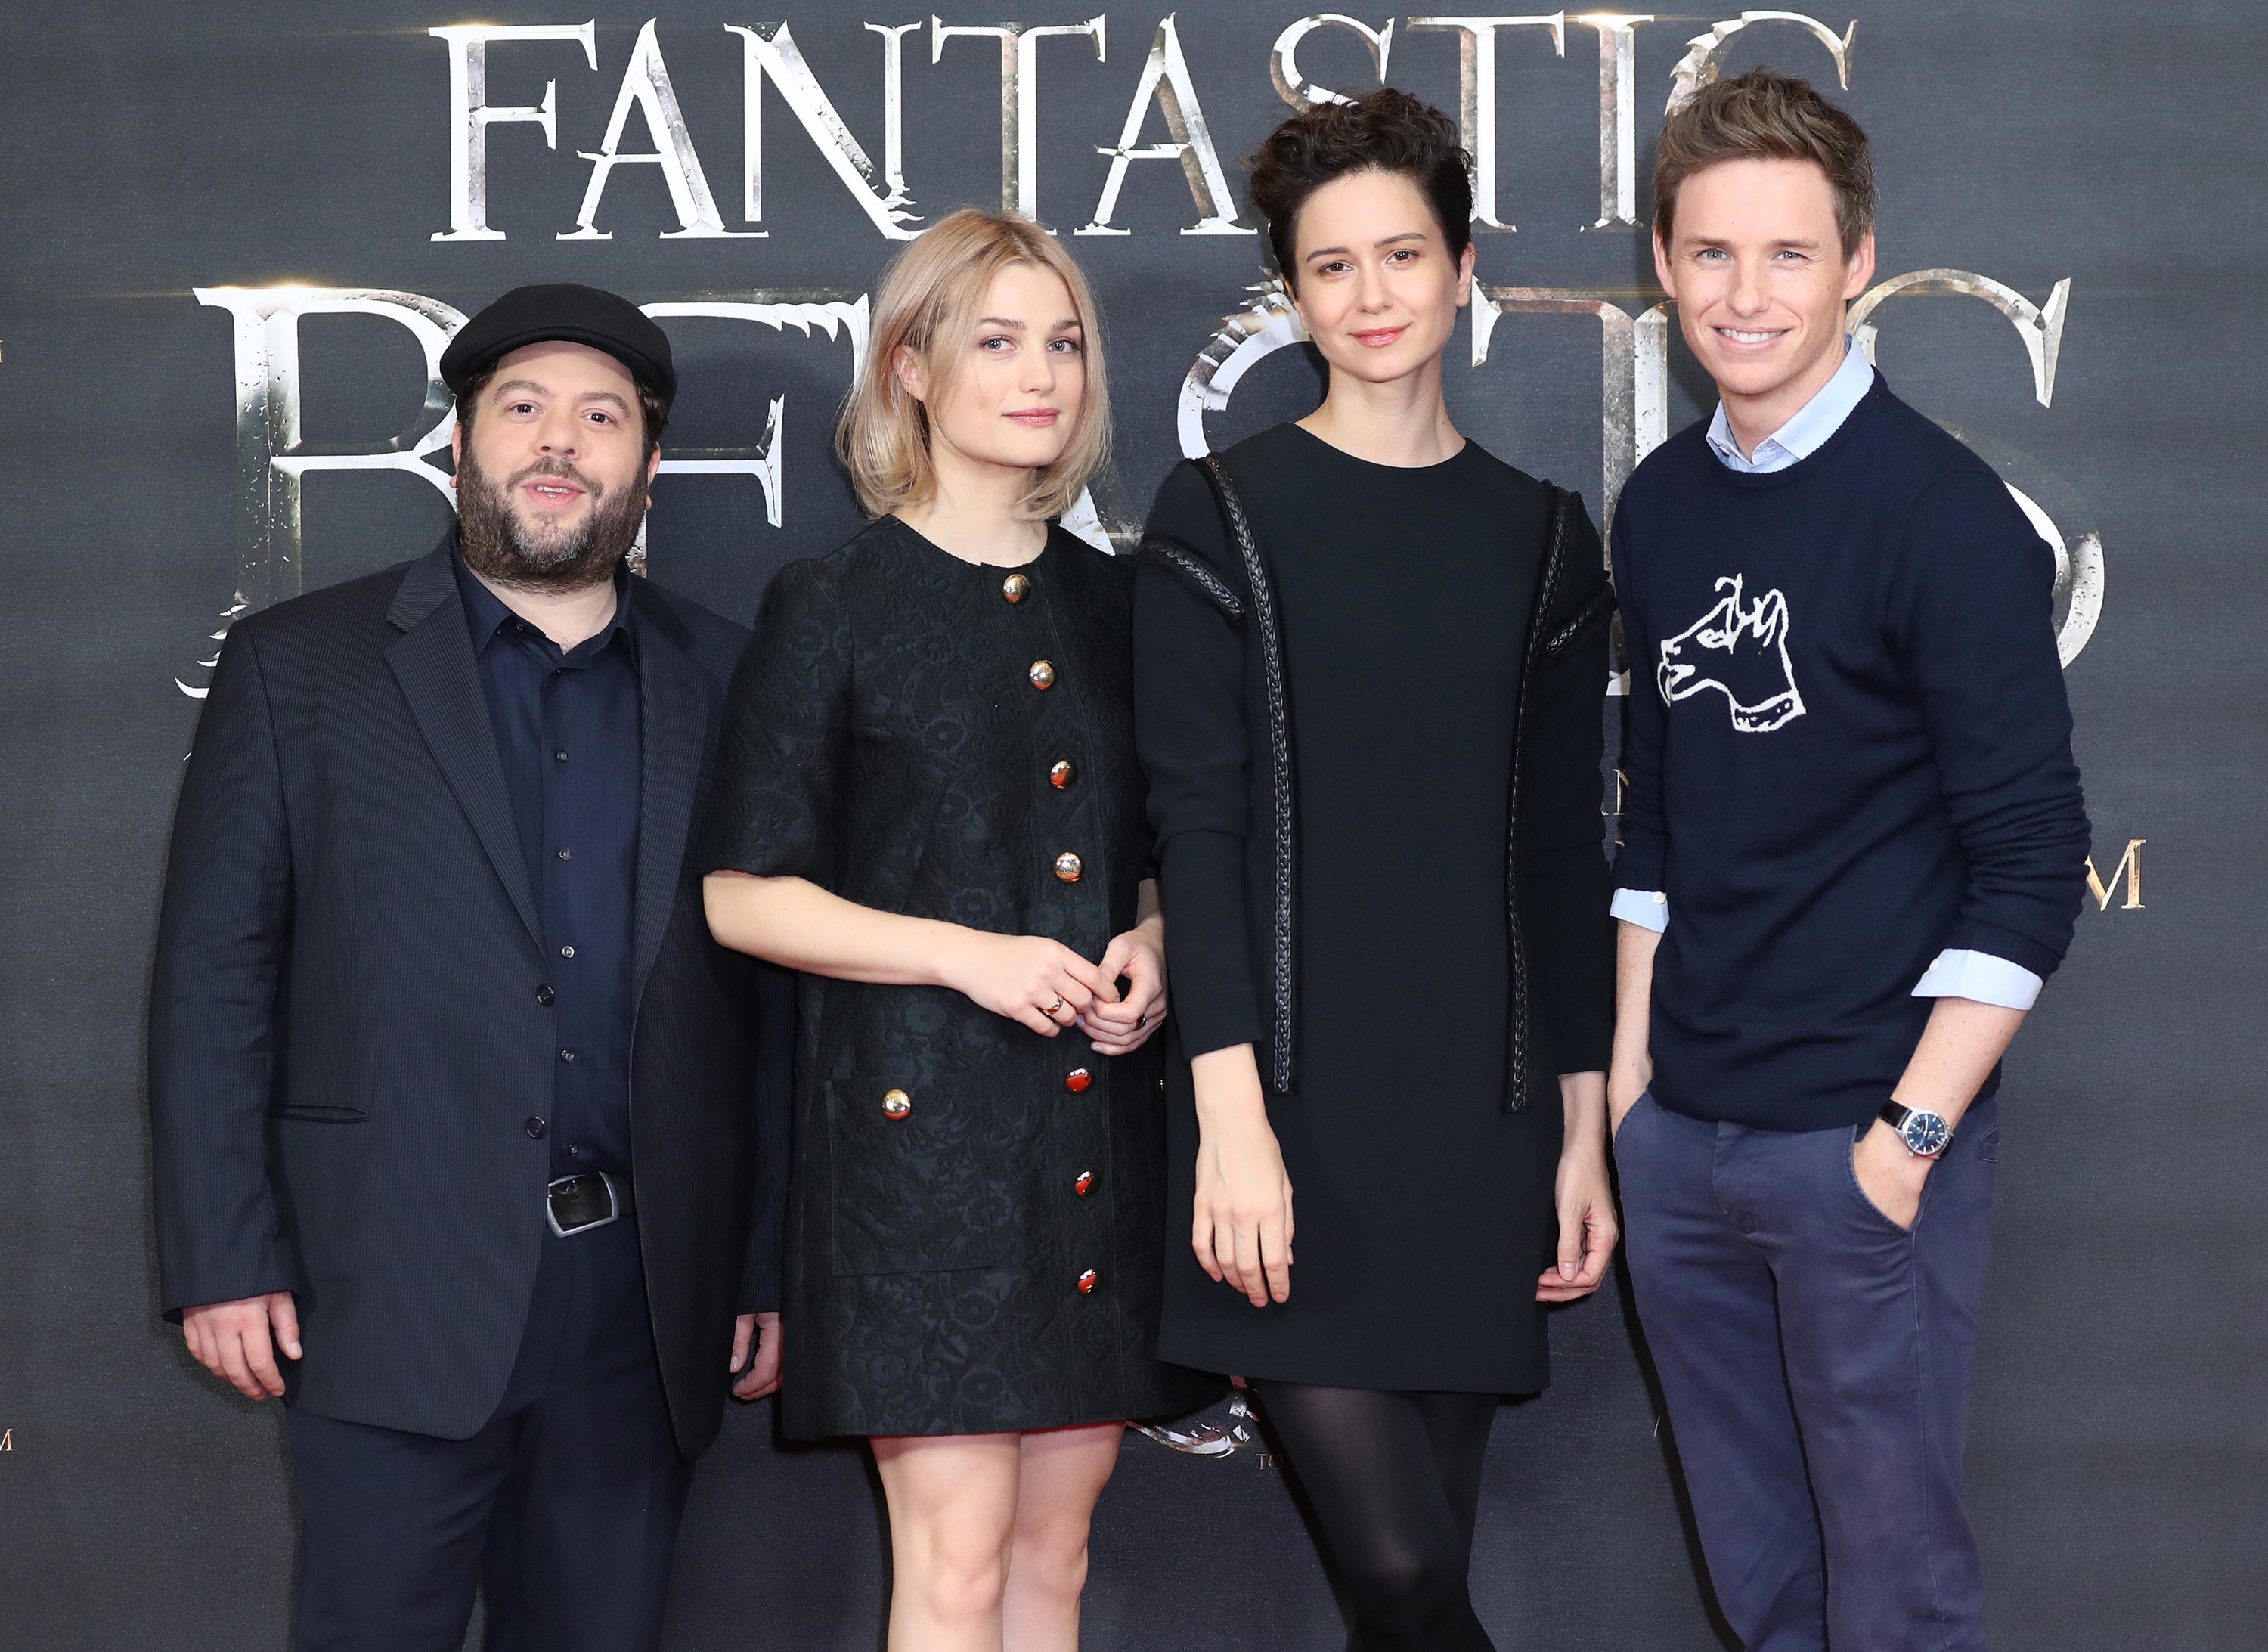 Dan Fogler, Alison Loren Sudol, Katherine Waterston and Eddie Redmayne attend a photocall for 'Fantastic Beast And Where To Find Them' at May Fair Hotel on October 13, 2016 in London, England